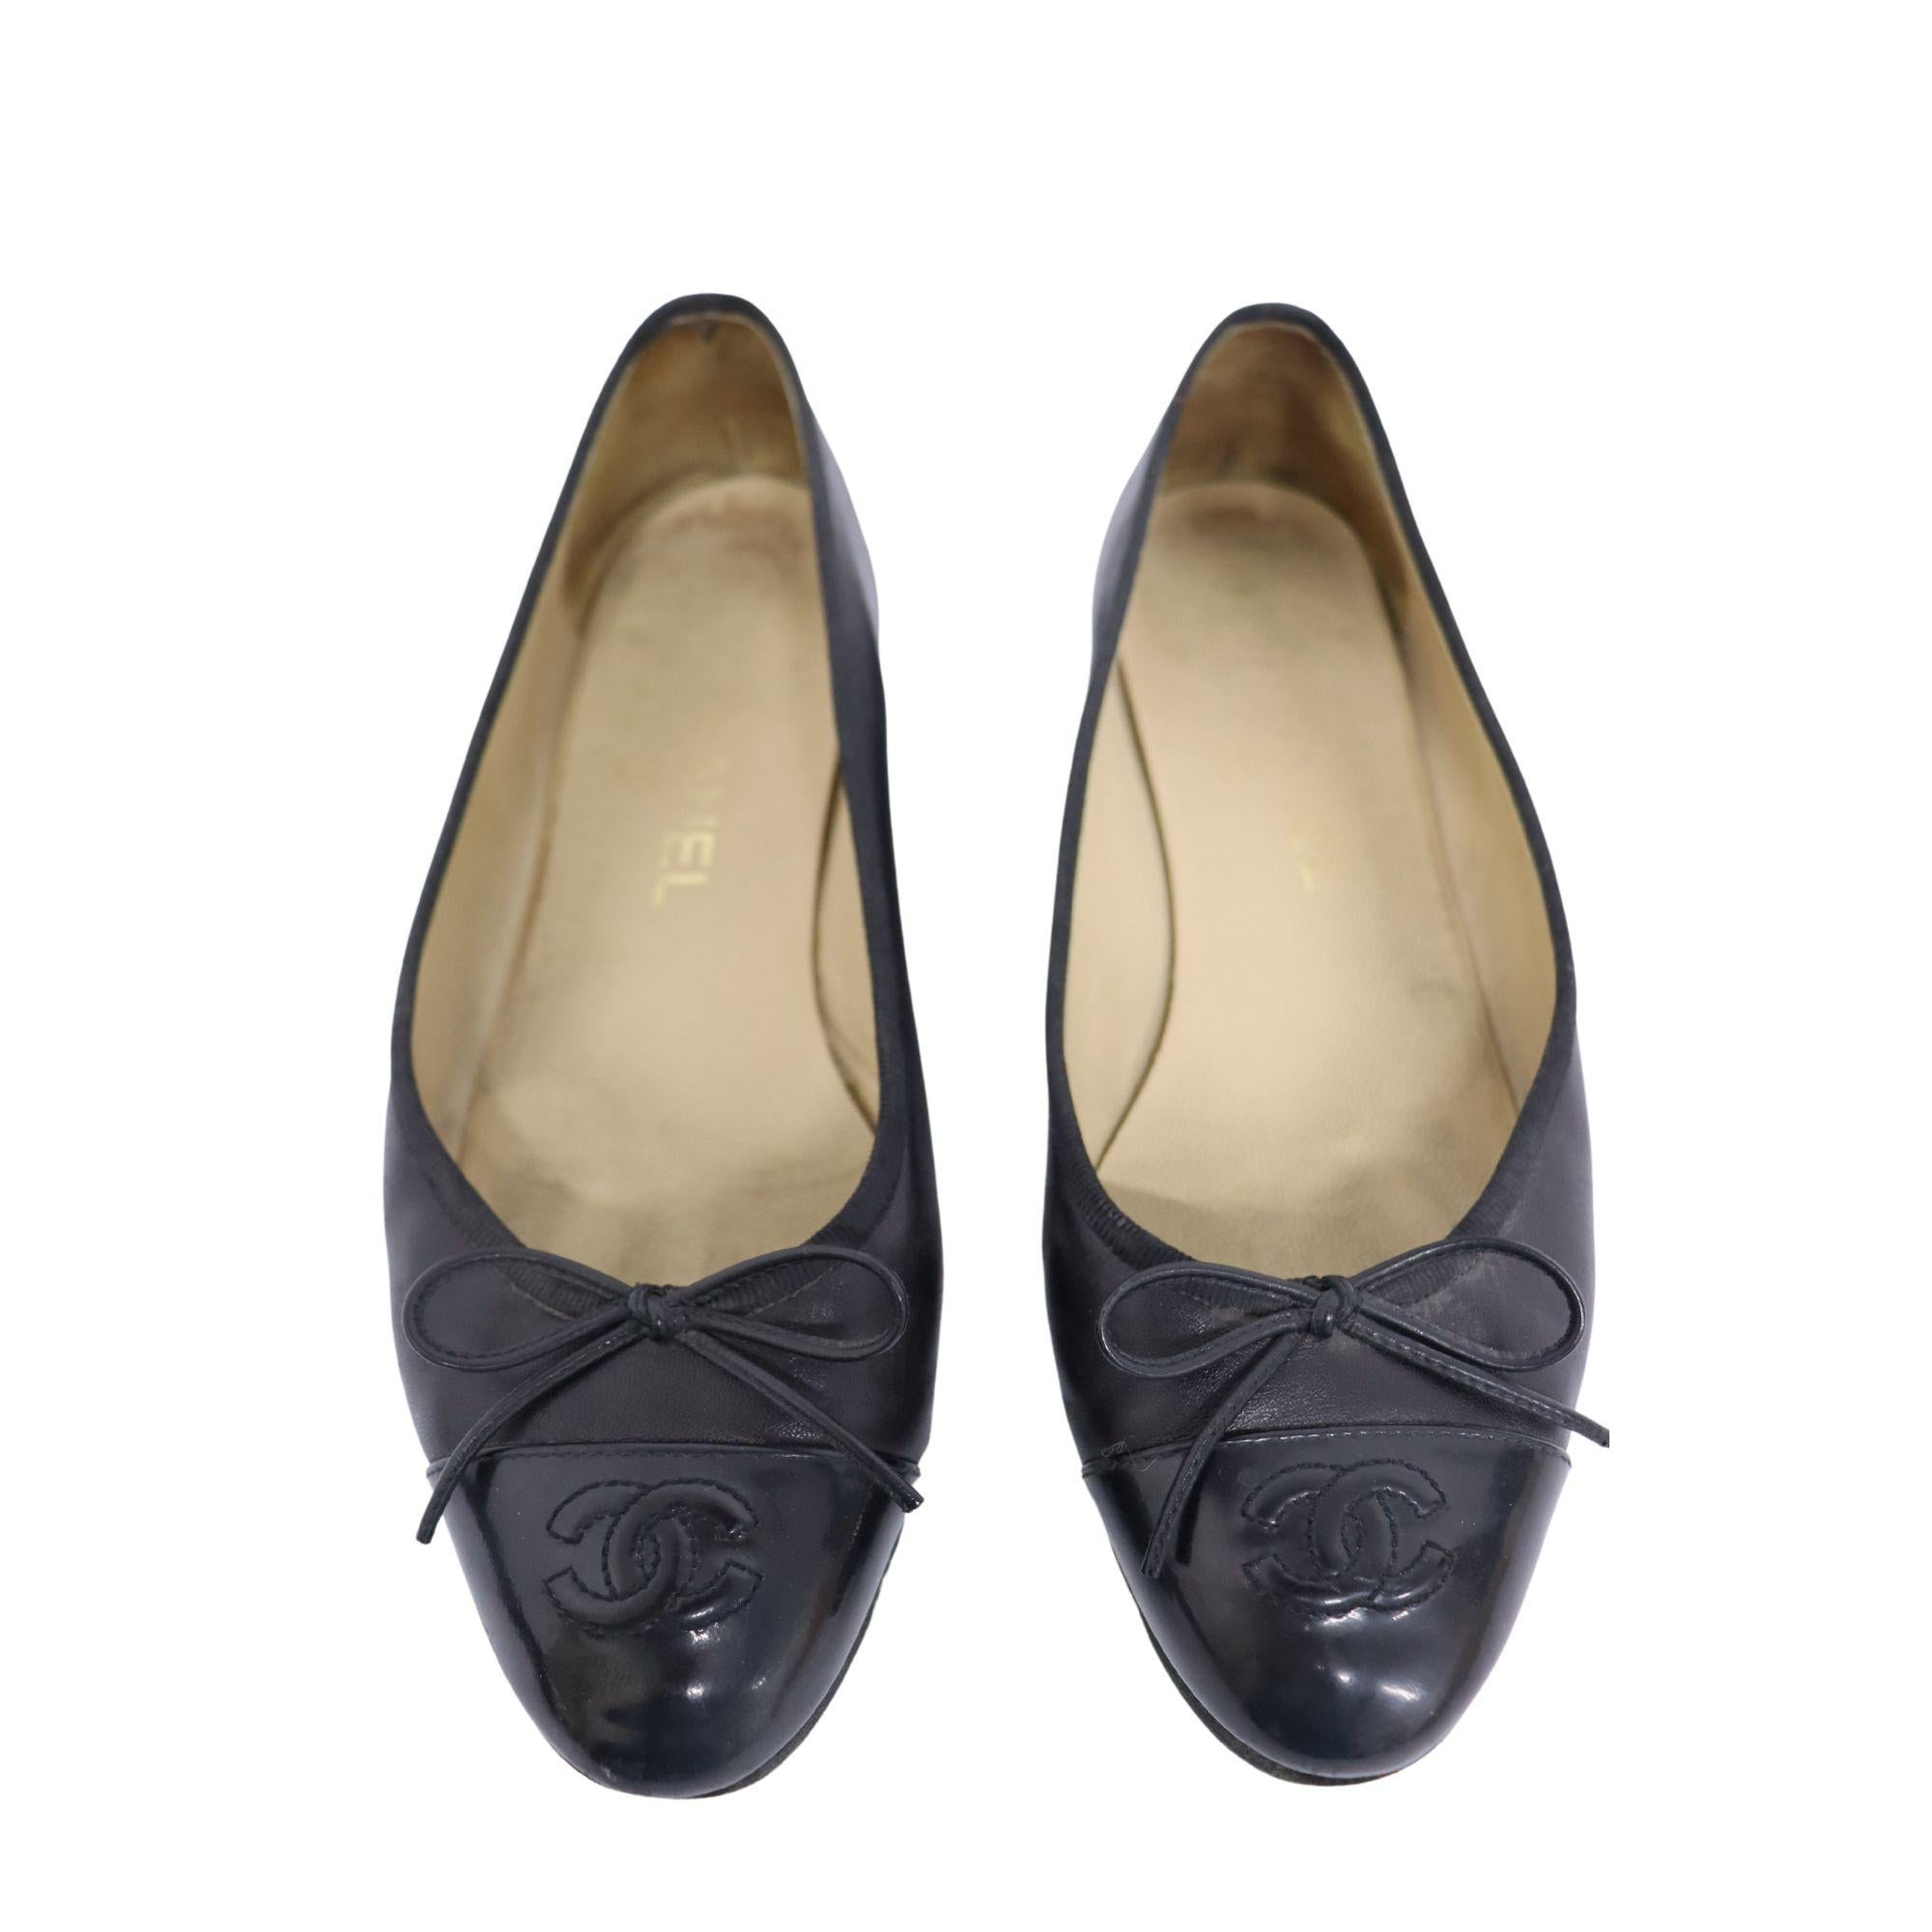 Black leather Chanel ballet flats, with bow detail, and patent leather Chanel-embossed toe.

Material: Leather
Size: EU 38
Overall Condition: Good
Interior Condition: signs of use.
Exterior Condition: some scuffing on the sides and toe.

Extras
N/A